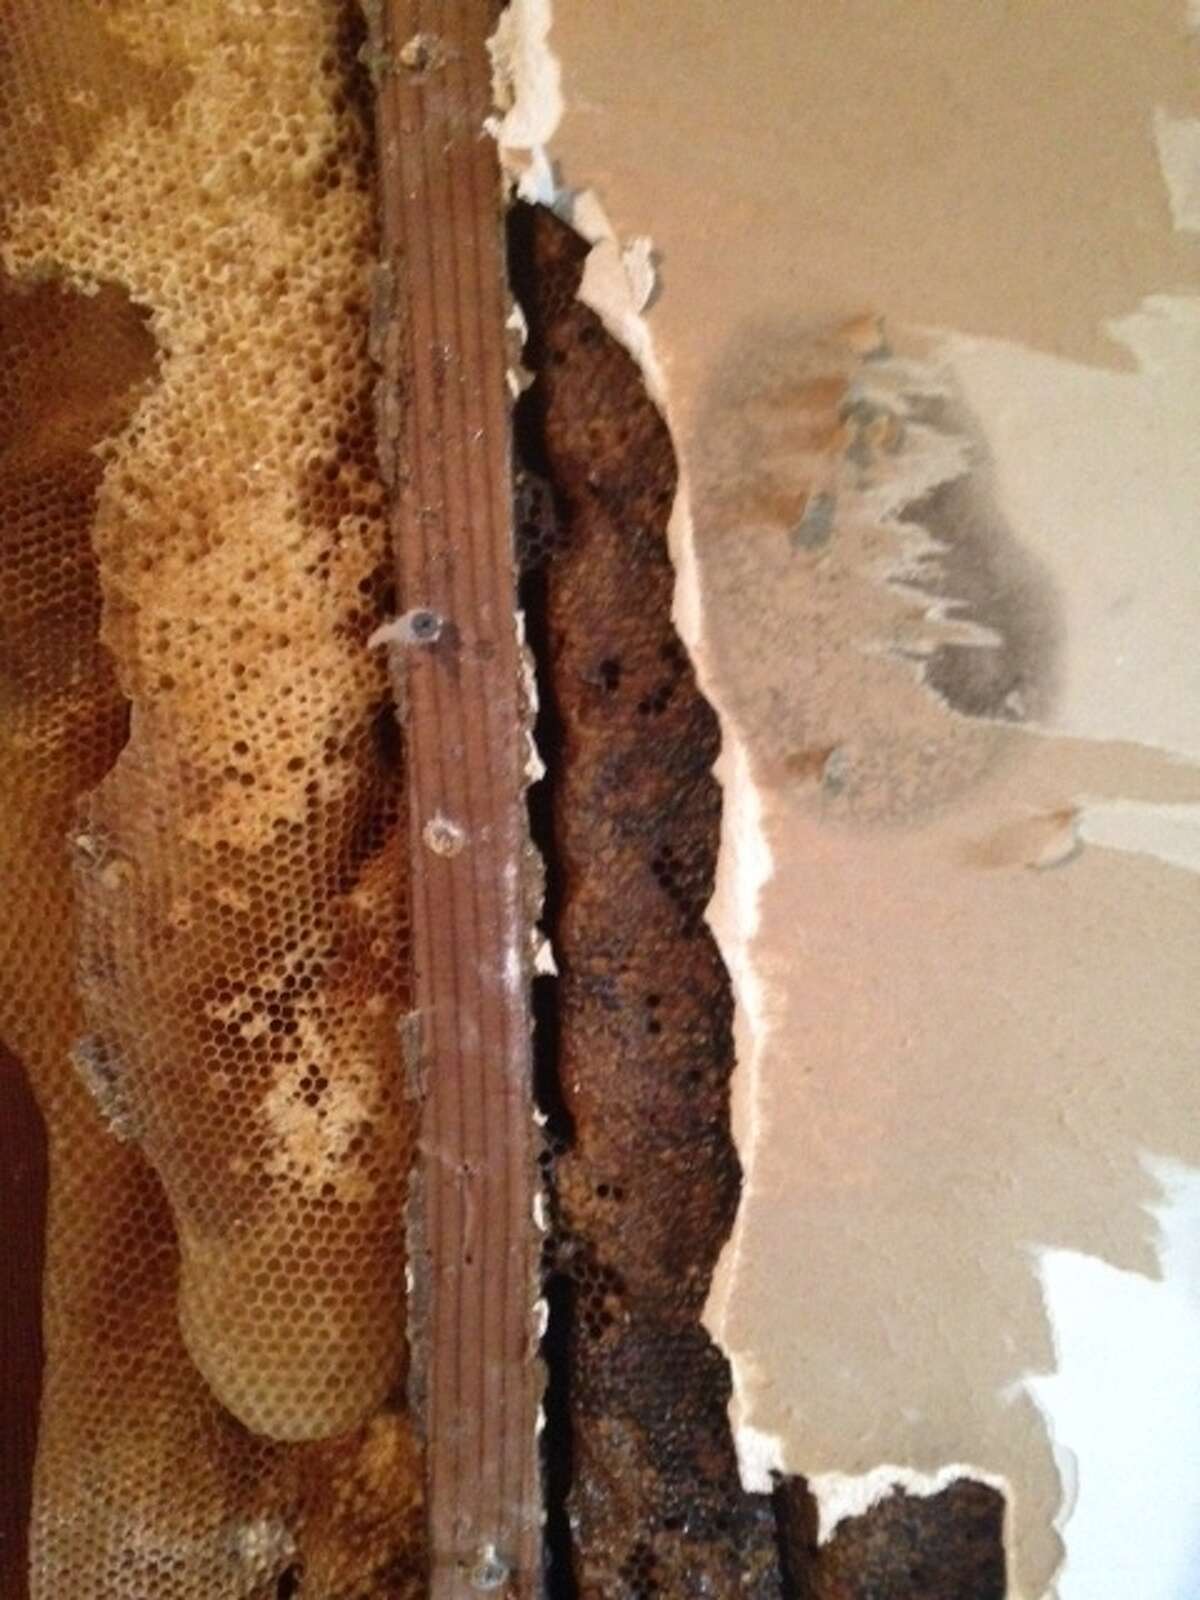 Beekeepers think the hive made be twenty feet high and contain up to 500,000 bees.